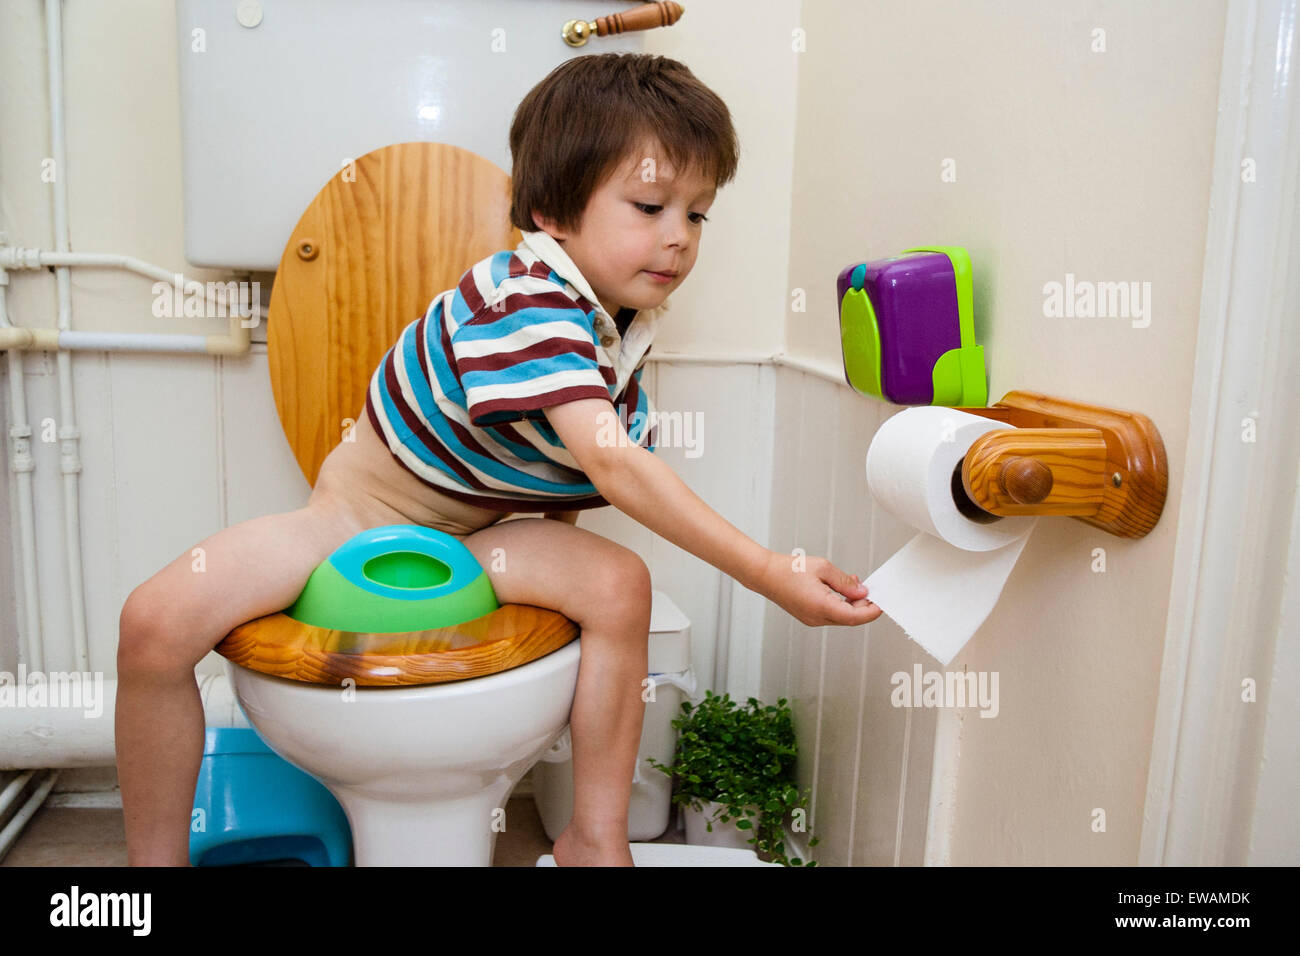 Caucasian child, boy, 4-5 year old, facing while sitting on child toilet seat on toilet and pulling toilet paper from holder on wall next to him. Stock Photo